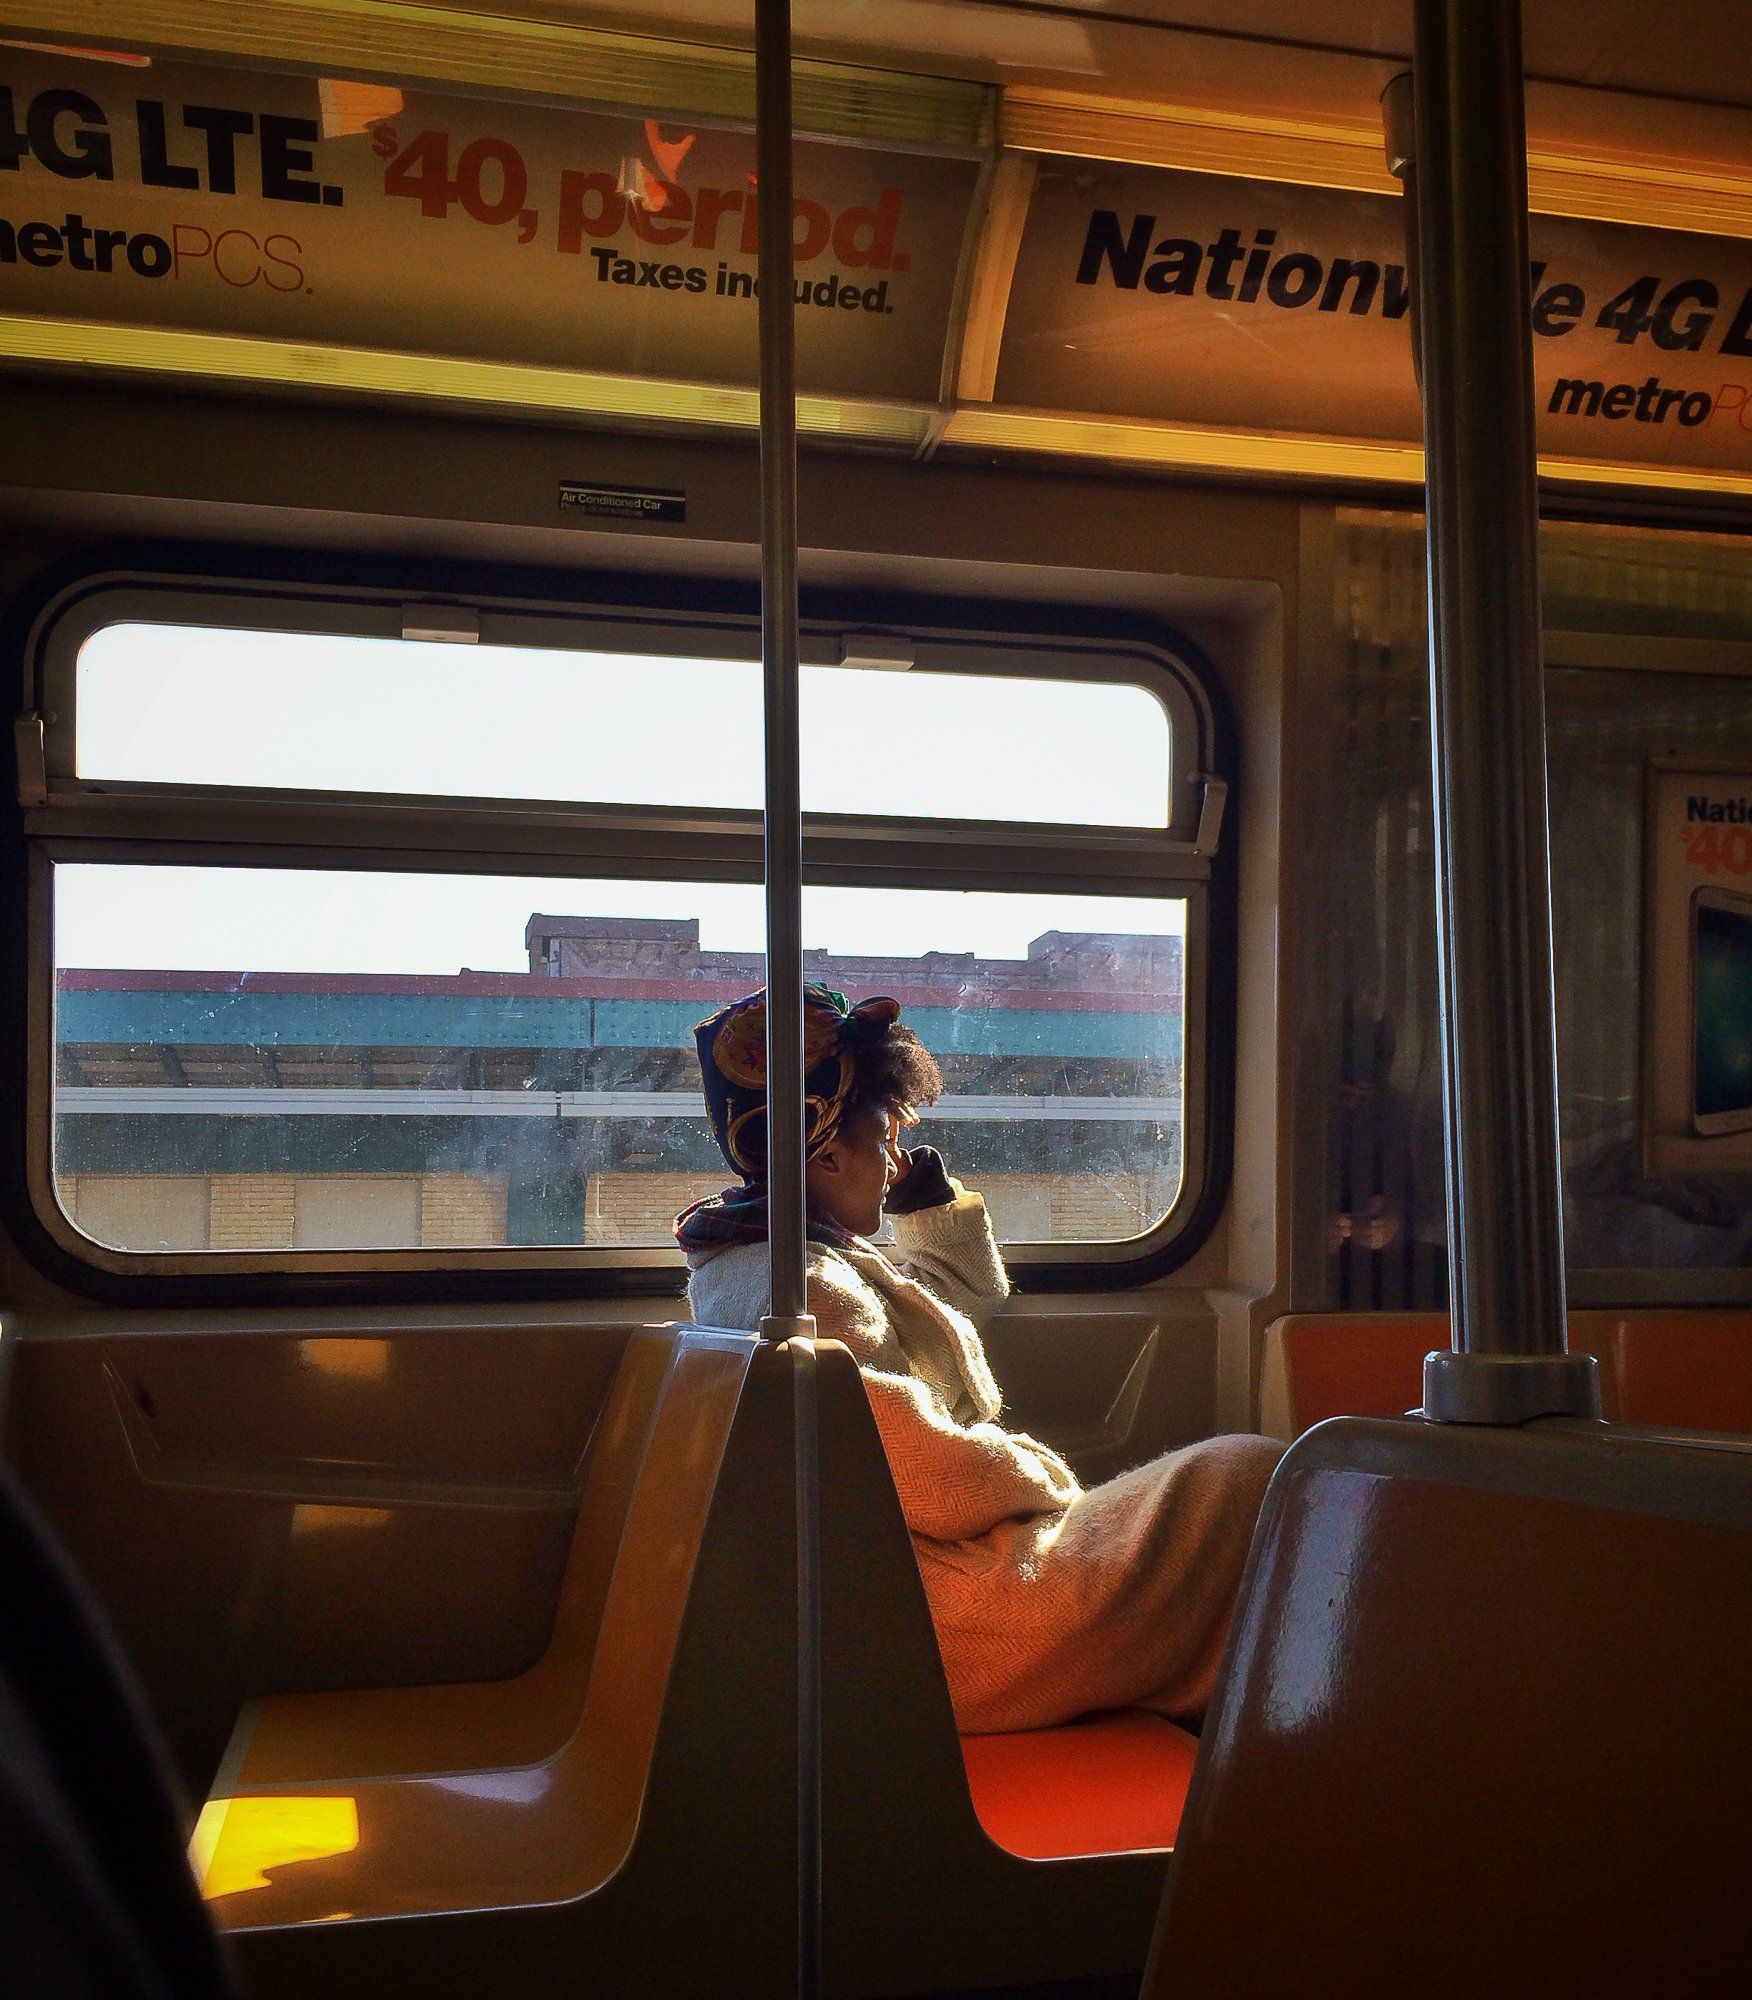 UNLIMITED METROCARD: Candid NYC Subway Photographs